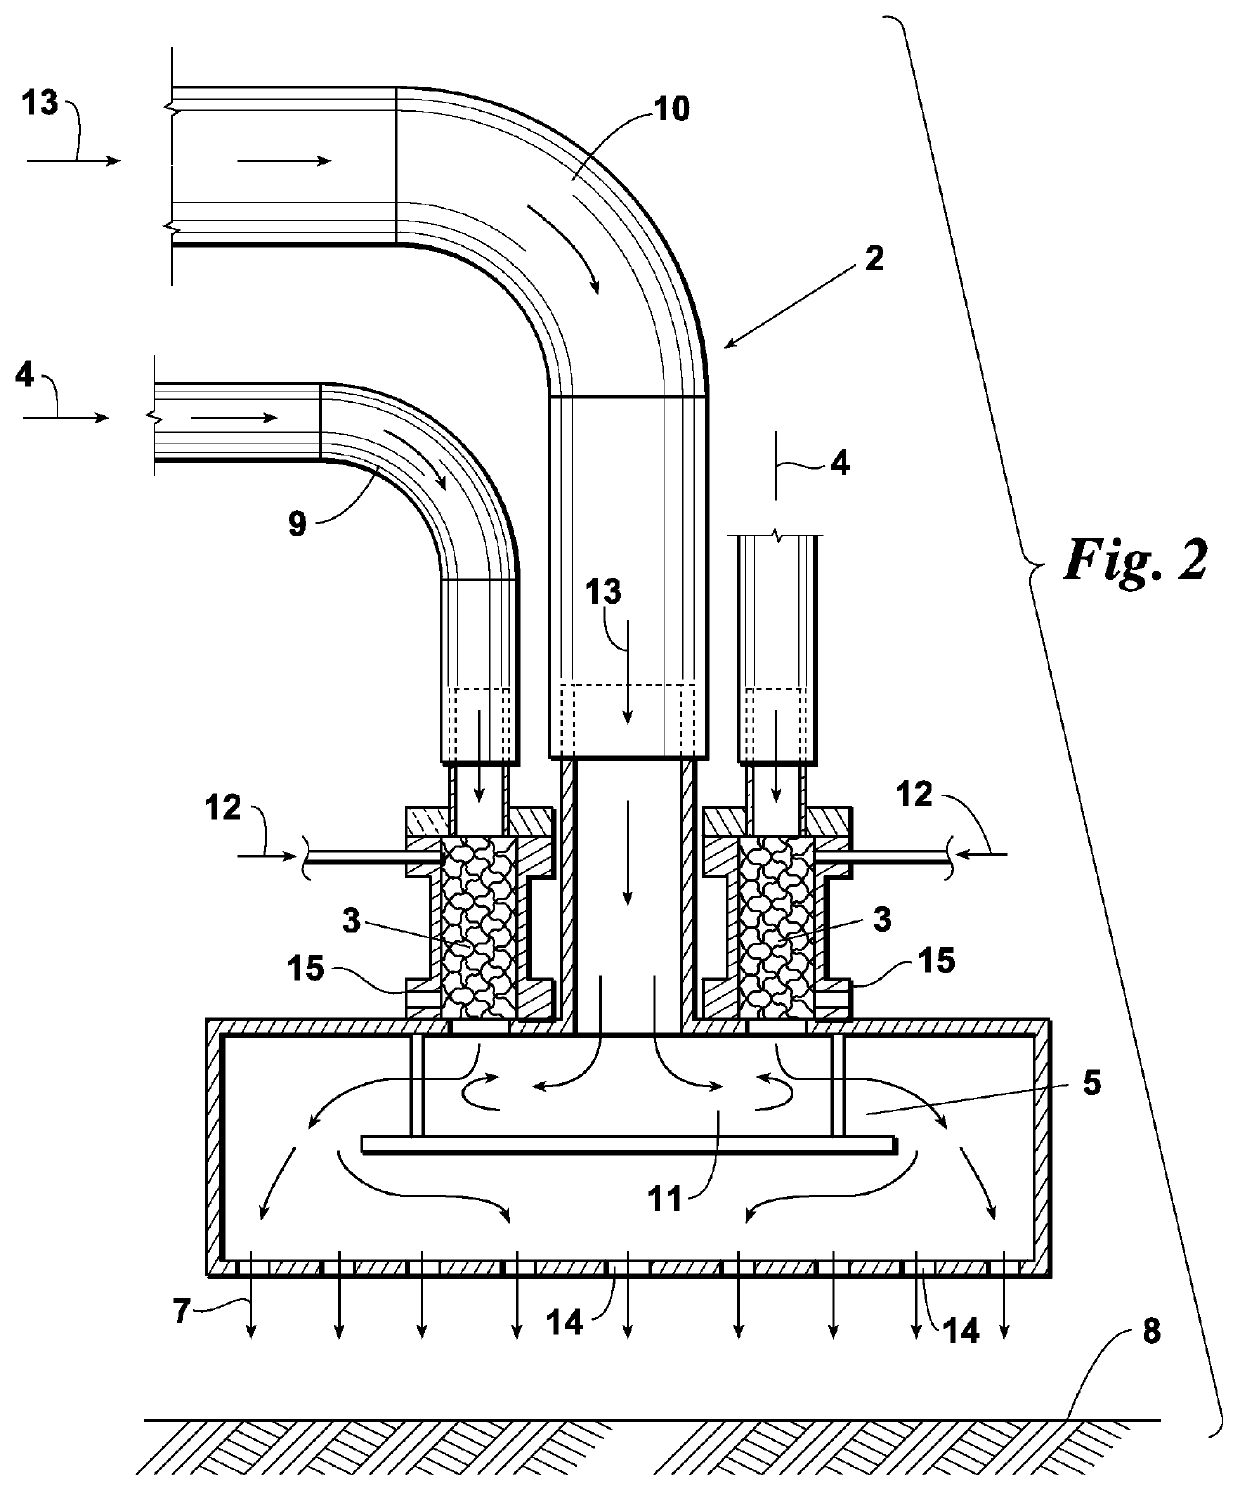 Engine exhaust-driven heating device for use in portable surface drying equipment